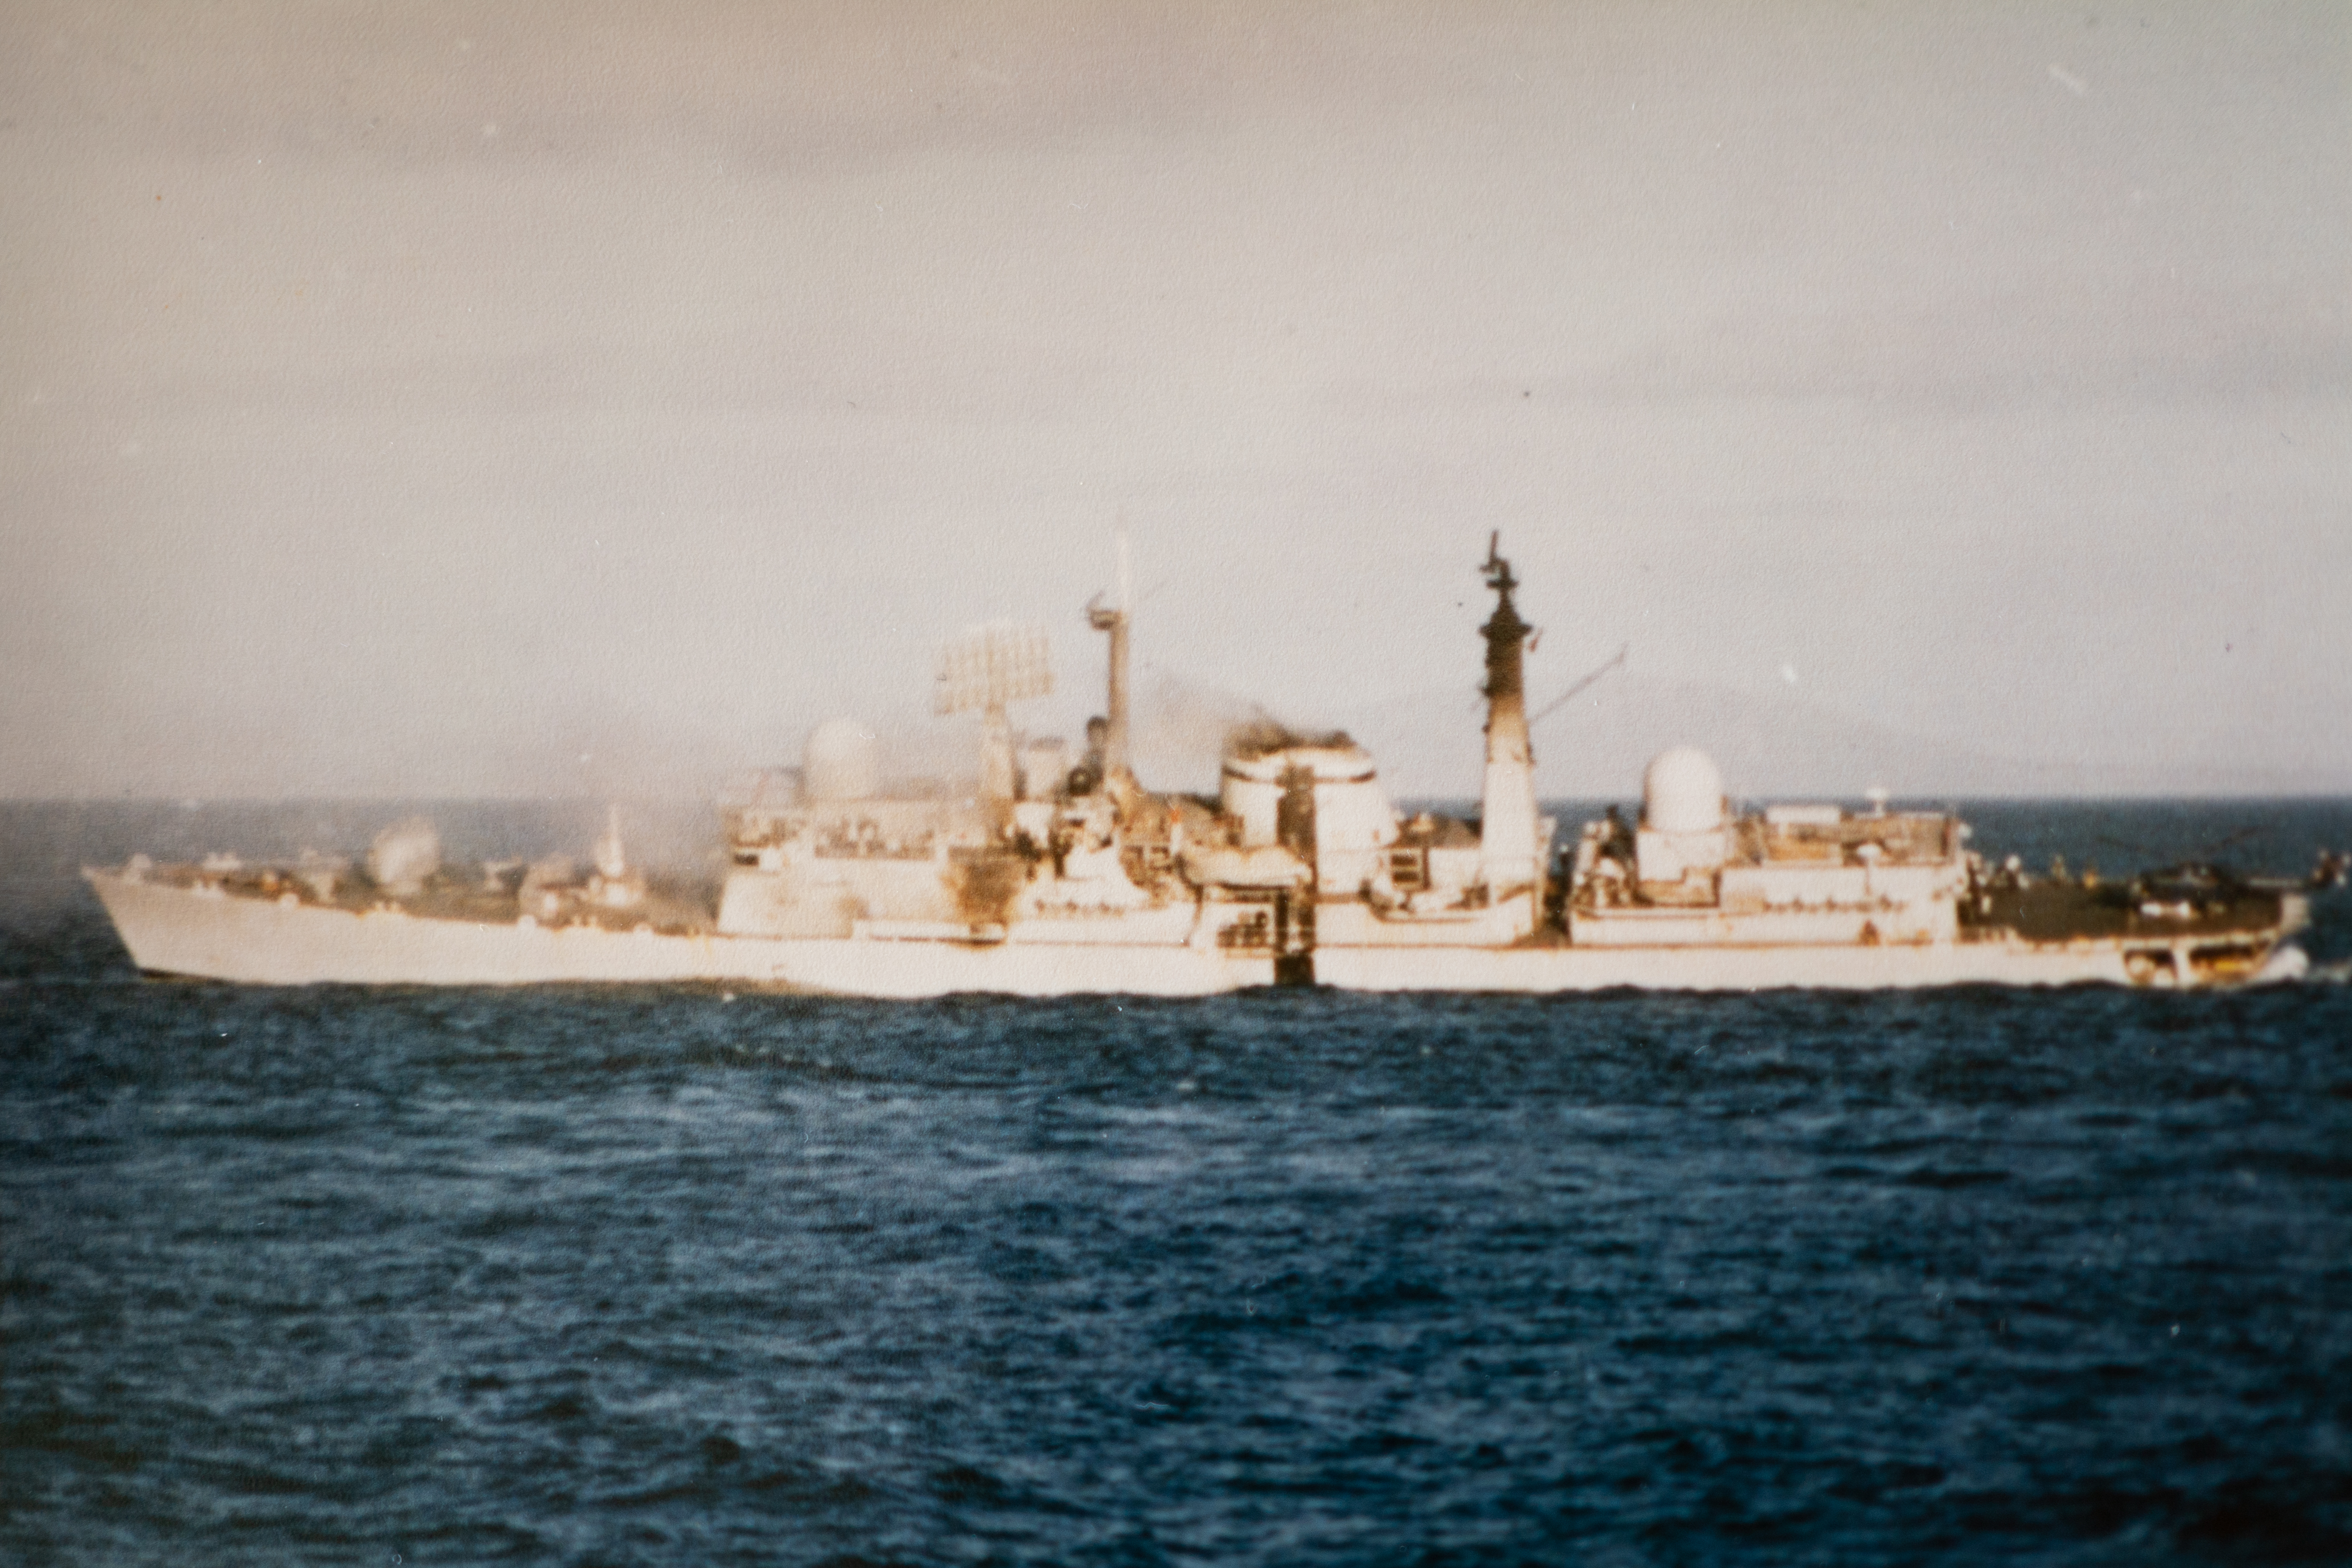 HMS Coventry listing to one side after being hit